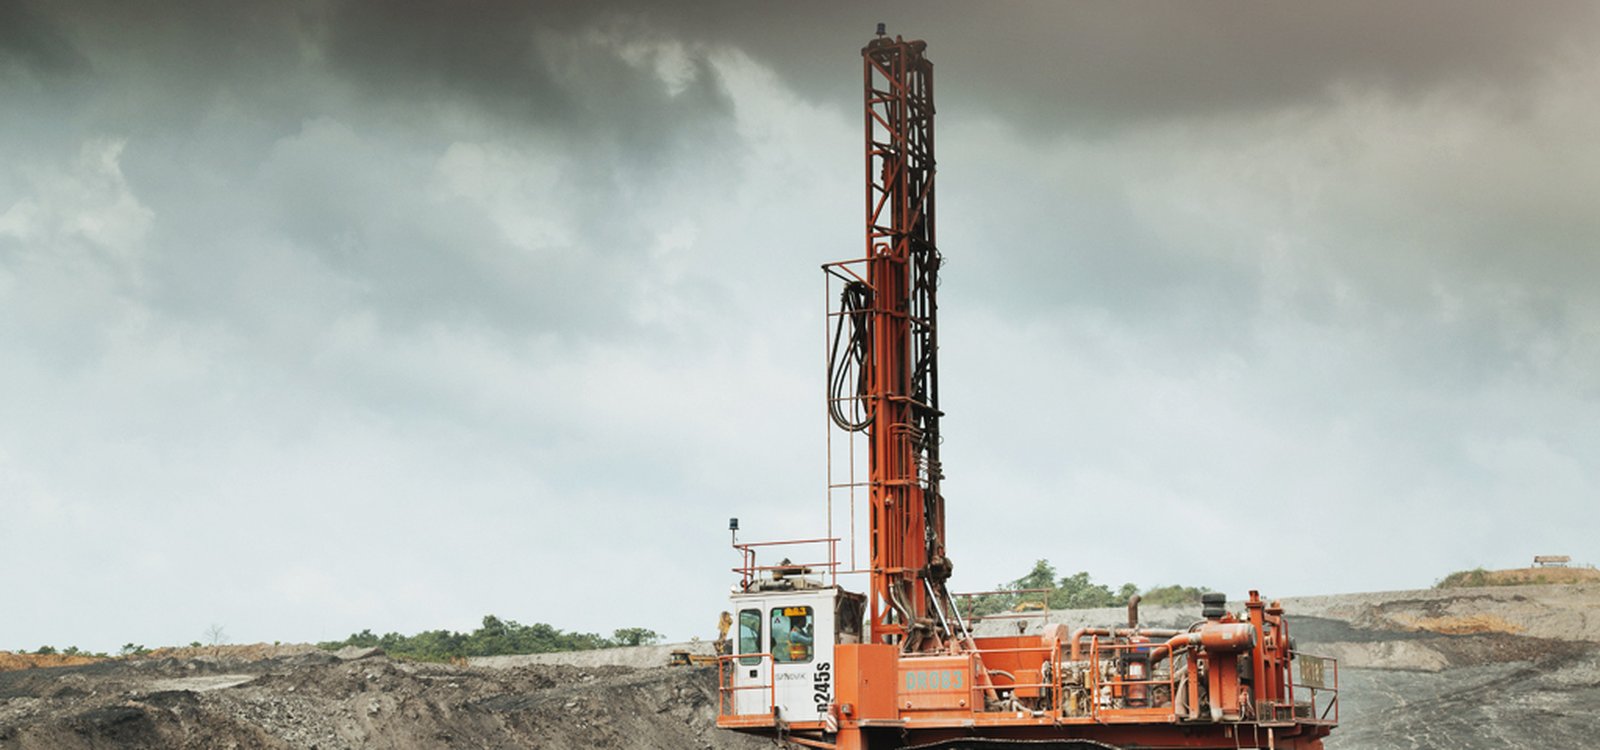 Two Sandvik D245S blasthole drill rigs at Jembayan are always on the move, drilling the 8.5-metre-deep holes that the blasting team fills with explosives several times a day.